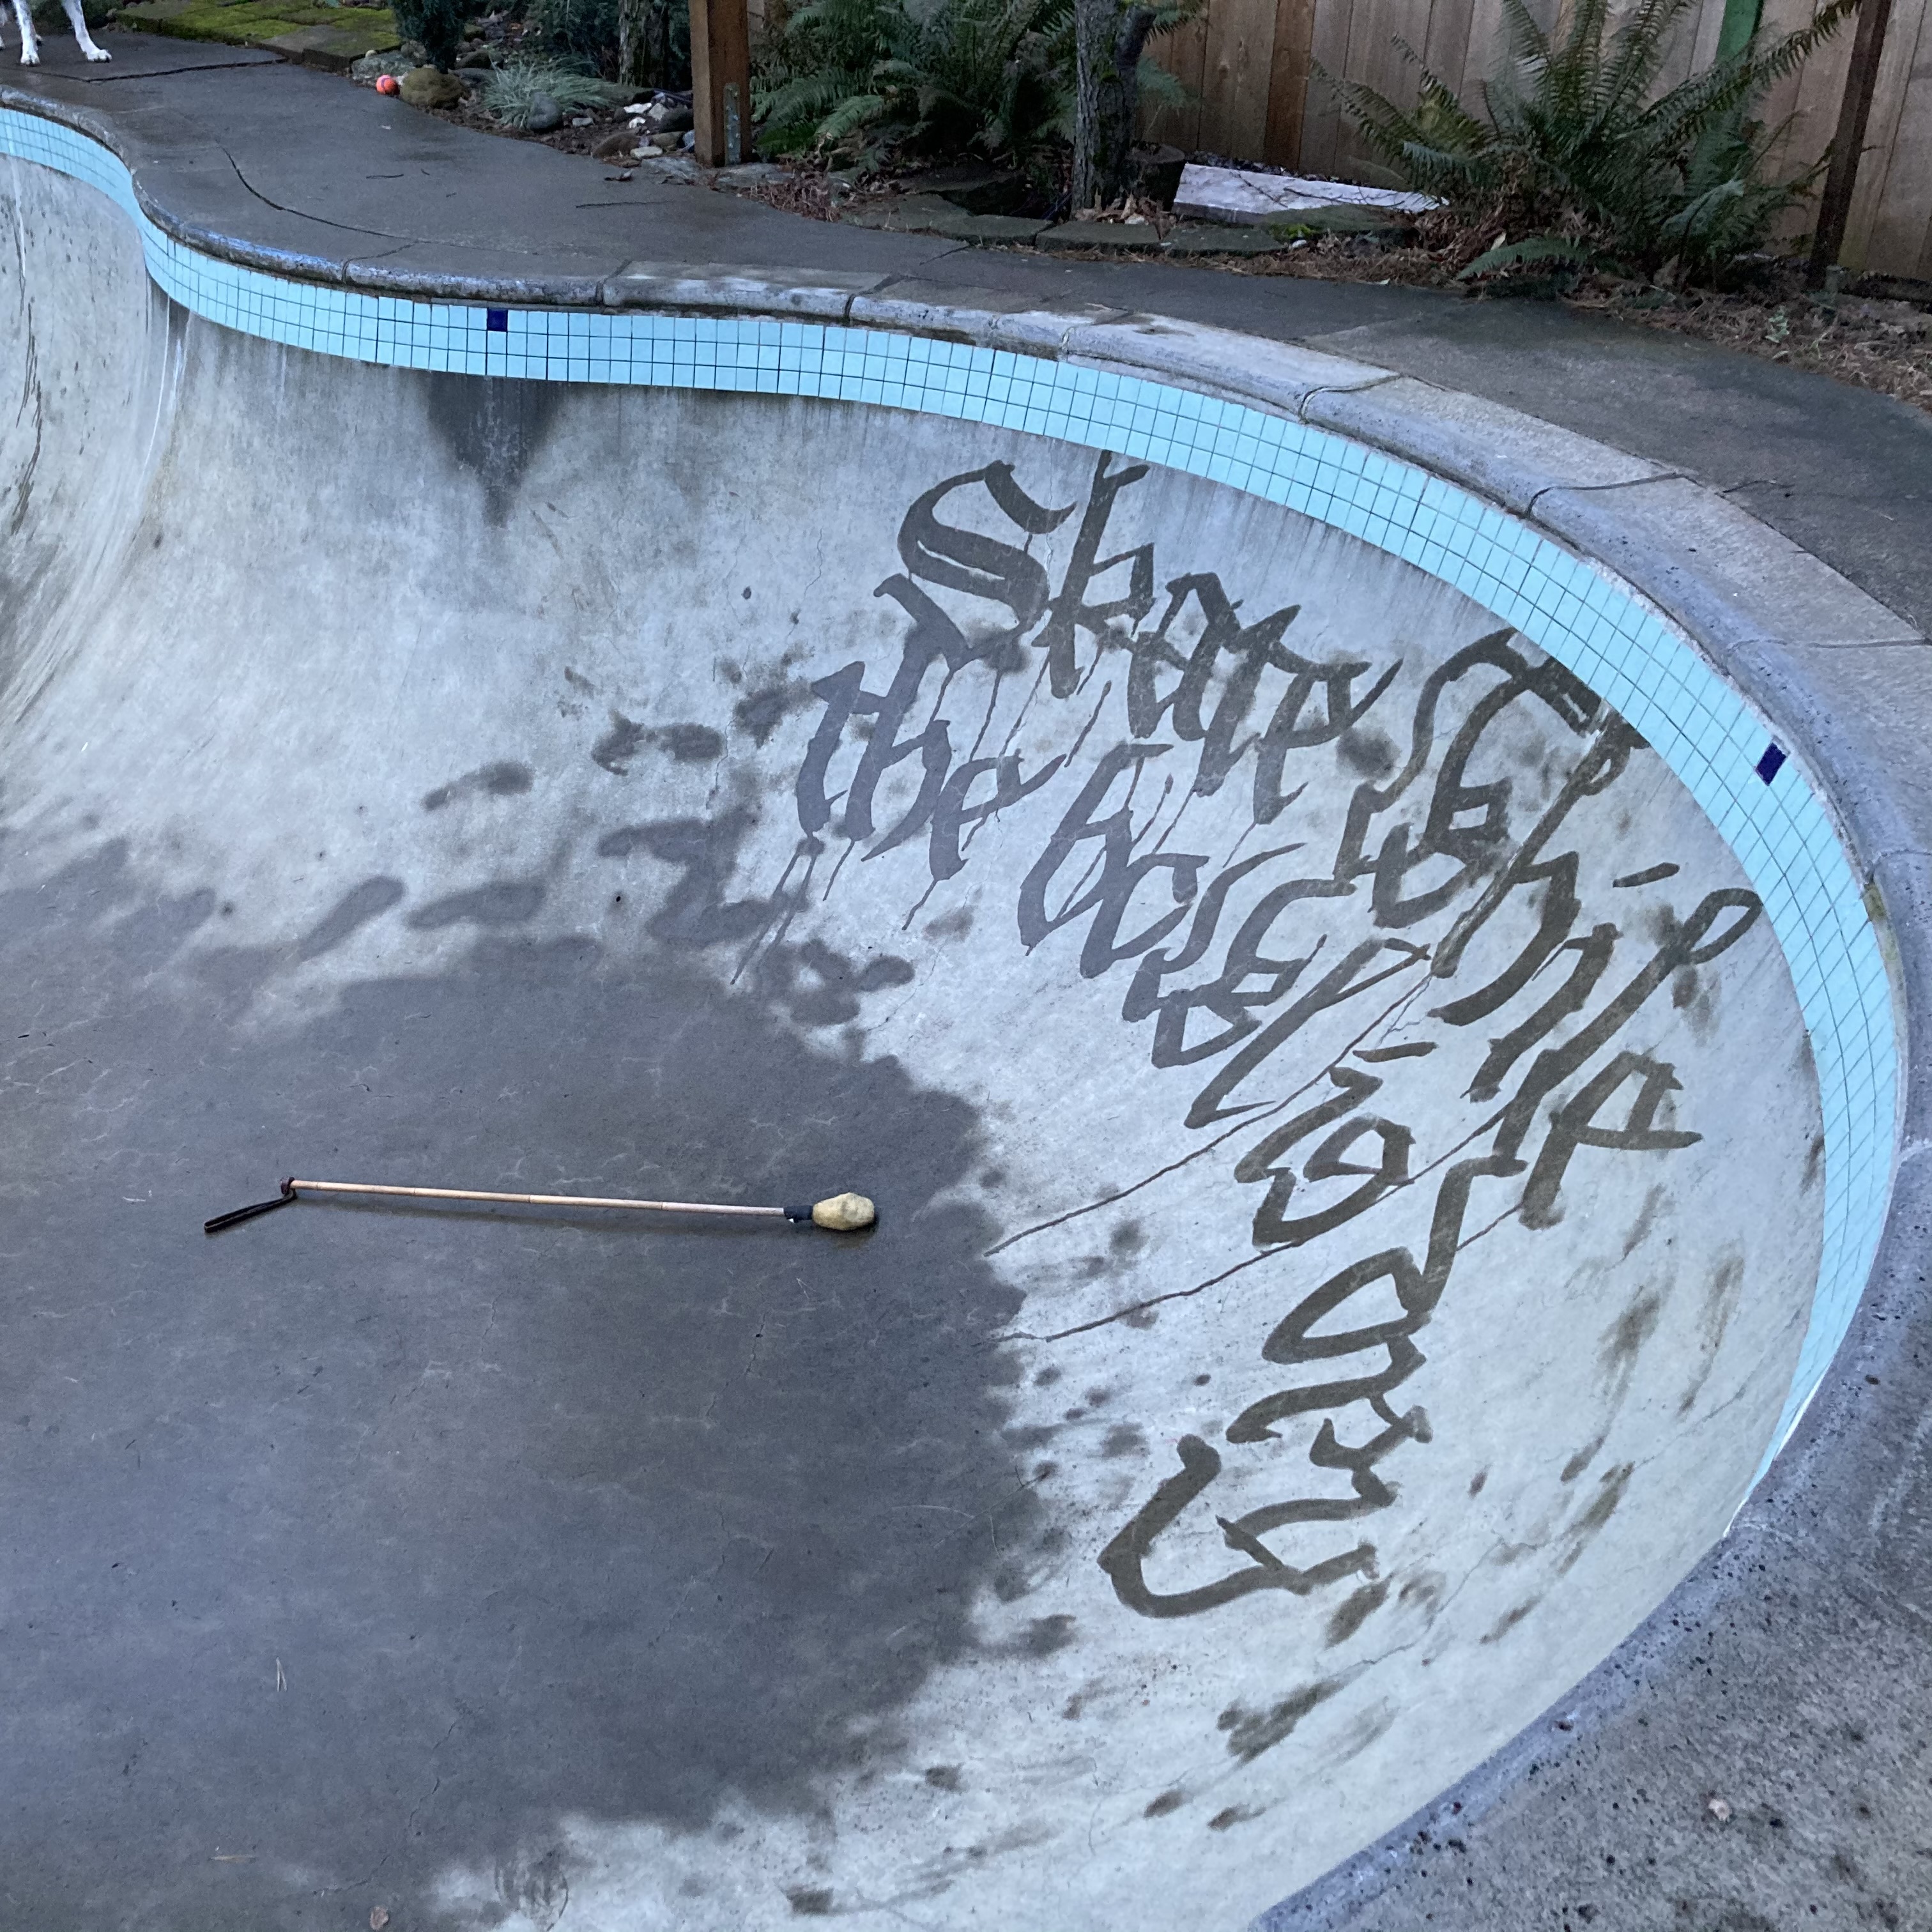 blackletter dishu - skate while the bowl is dry.